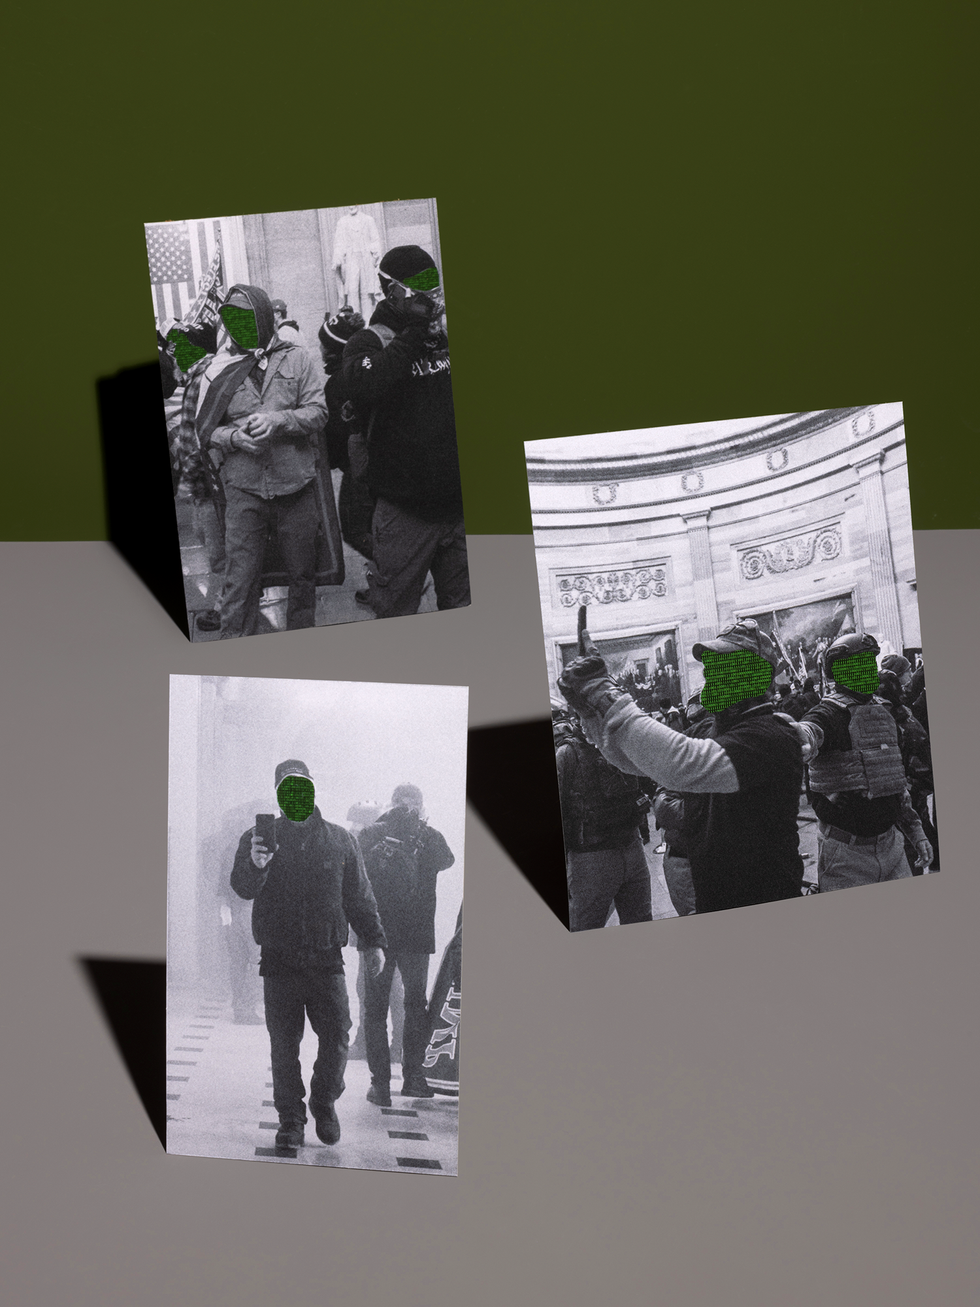 Illustration consisting of 3 black-and-white photos of people inside the U.S. Capitol building during the 6 January 2021 riot. Some of the faces are overlaid with a green mesh.